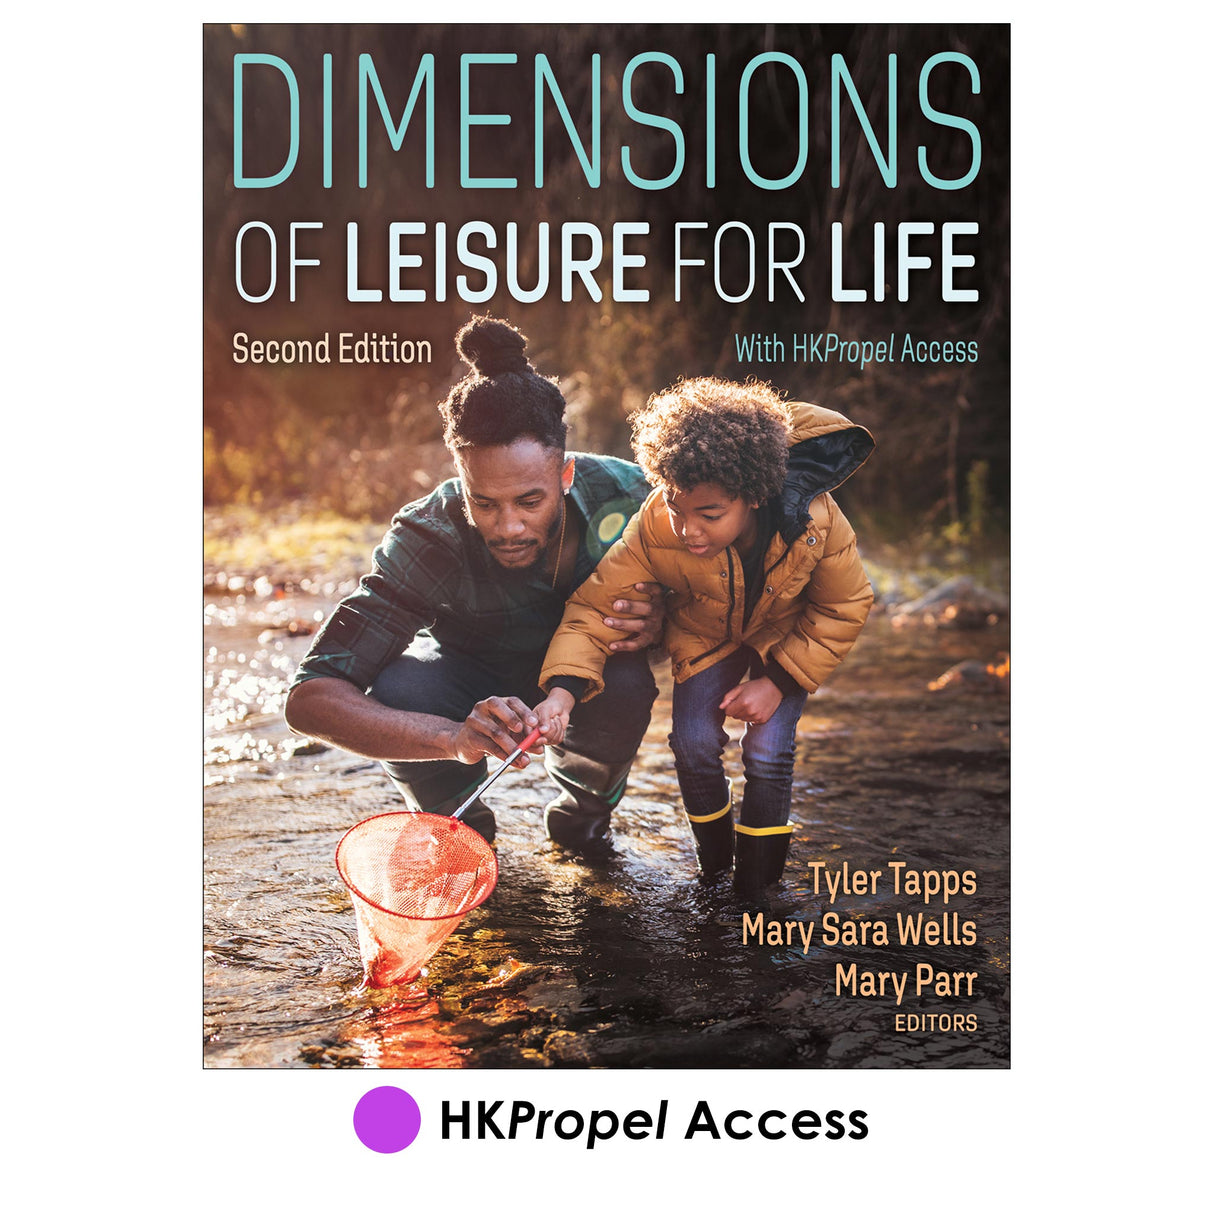 Dimensions of Leisure for Life 2nd Edition HKPropel Access